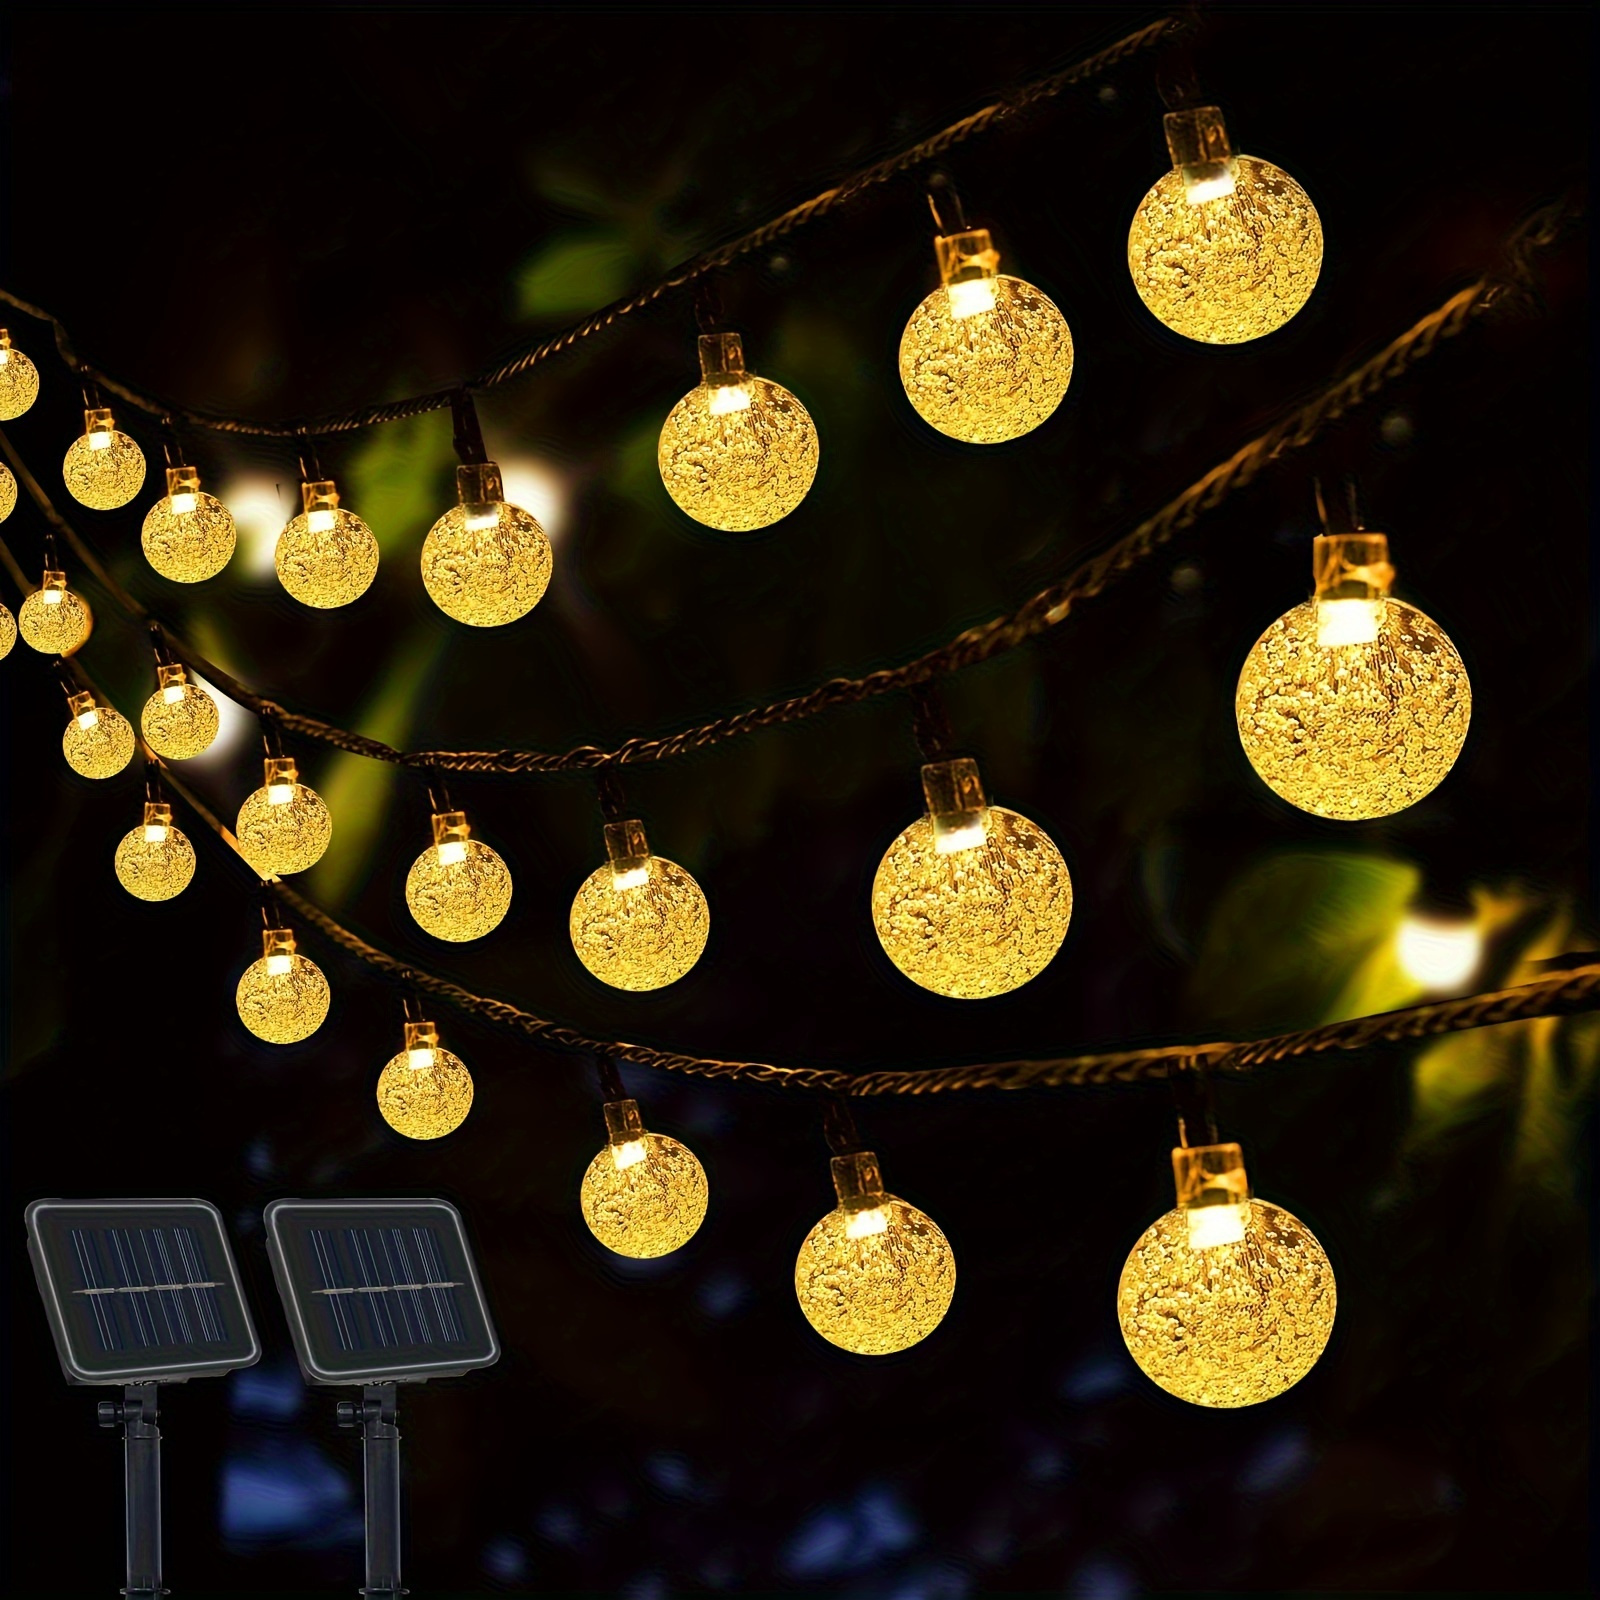 

2 Packs Of 15m 100 Led Crystal Ball Lights With 8 Lighting Modes For Tree, Patio, Garden, Balcony, Party Decorations.